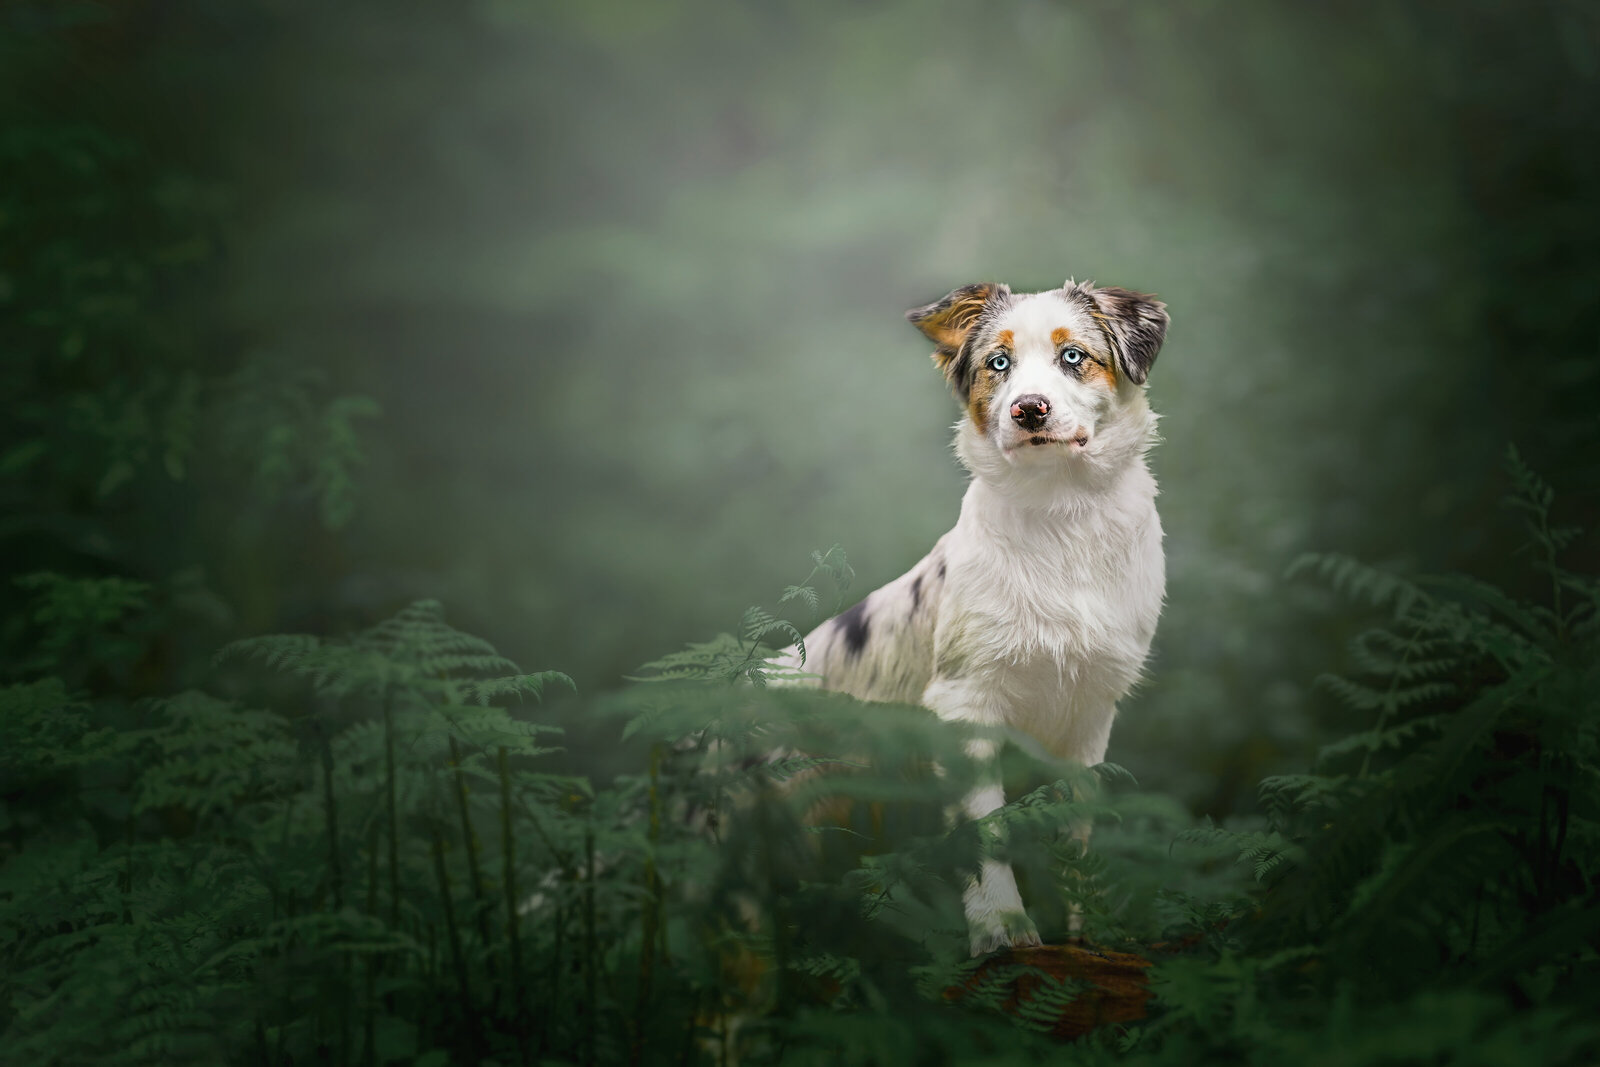 Dive into the mystical realm of fine art pet portraits with “Enchanted Forest Sentinel” by Pets through the Lens Photography. This stunning photograph captures a blue merleAustralian Shepherd, poised and alert, amidst a lush, misty forest setting. The ethereal light and the rich greens of the ferns enhance the magical atmosphere, making this image a perfect showcase of our outdoor fine art pet photography expertise. Ideal for pet owners who cherish unique, artistic representations of their beloved companions in nature.